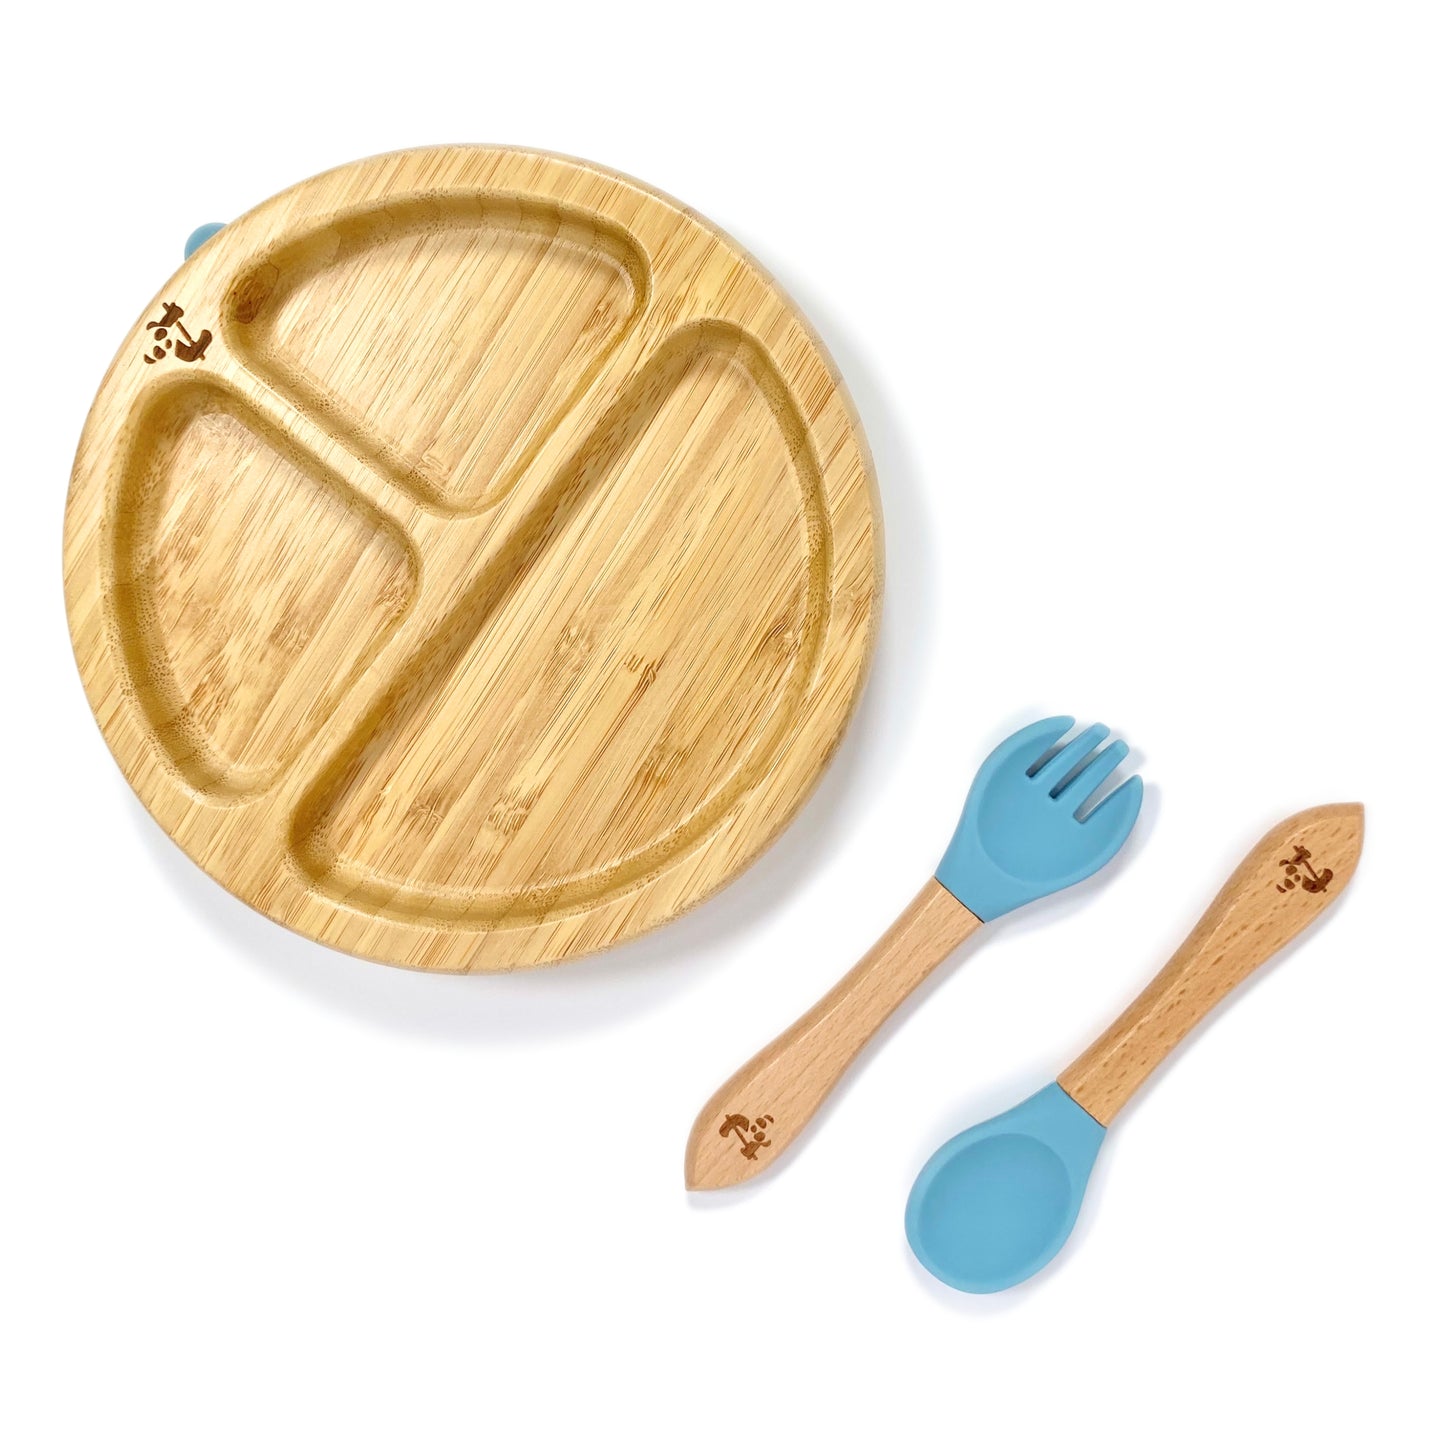 A children’s bamboo tableware set, including bamboo section plate with sky blue silicone suction ring, and matching bamboo and silicone cutlery.